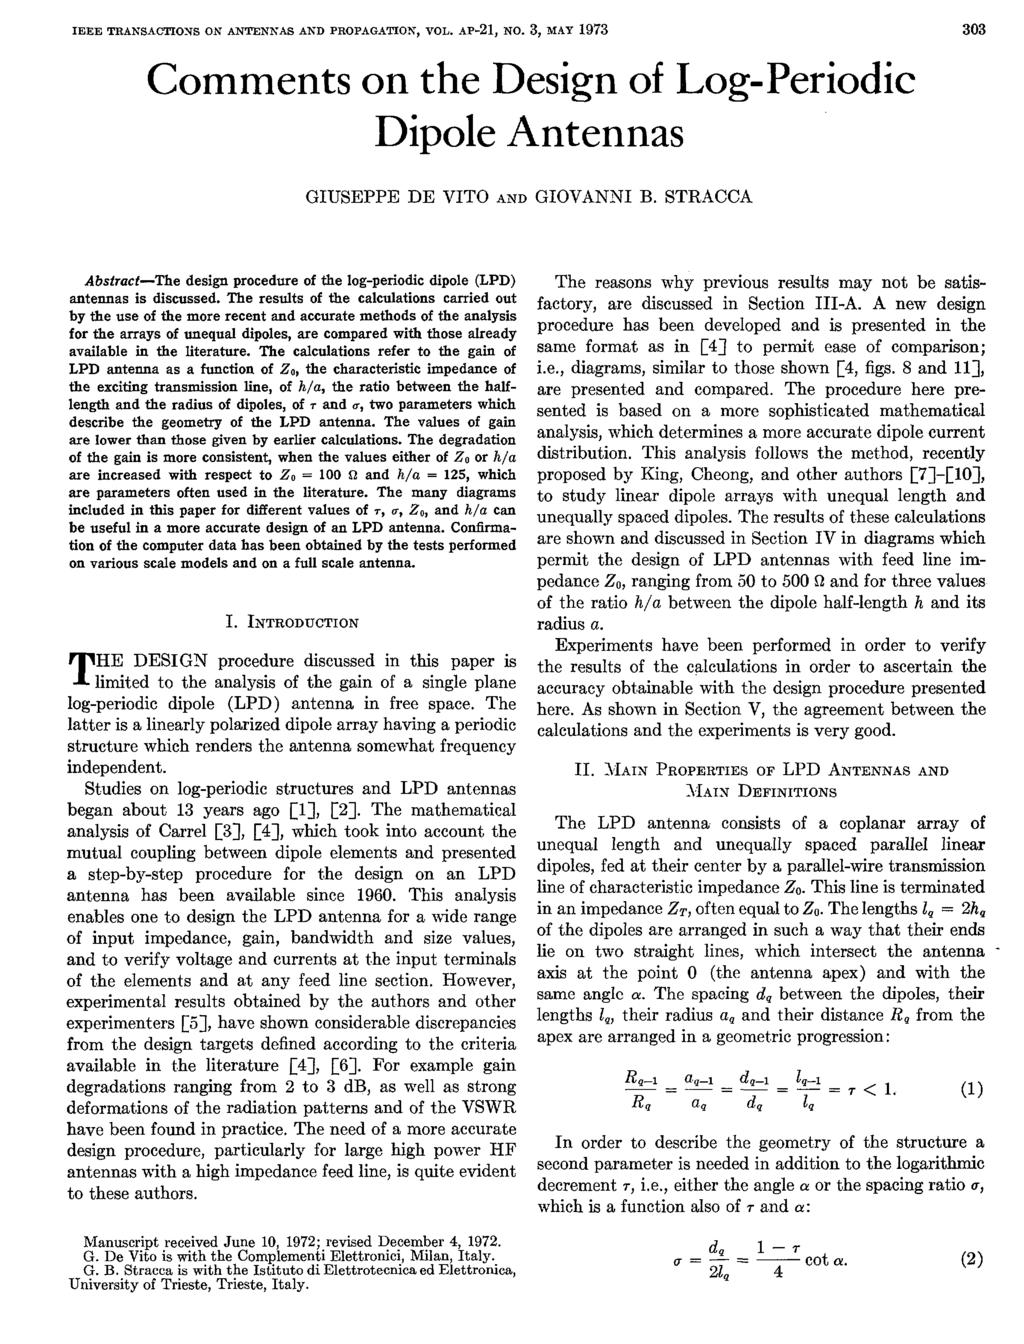 IEEE TRAKSdCTIONS ON ANTENKAS AKD PR0P.4GA4TIOX, VOL. AP-21, NO. 3, MAY 1973 303 Comments on the Design of Log-Periodic DiDole Antennas GIUSEPPE DE VITO AND GIOVANNI B.